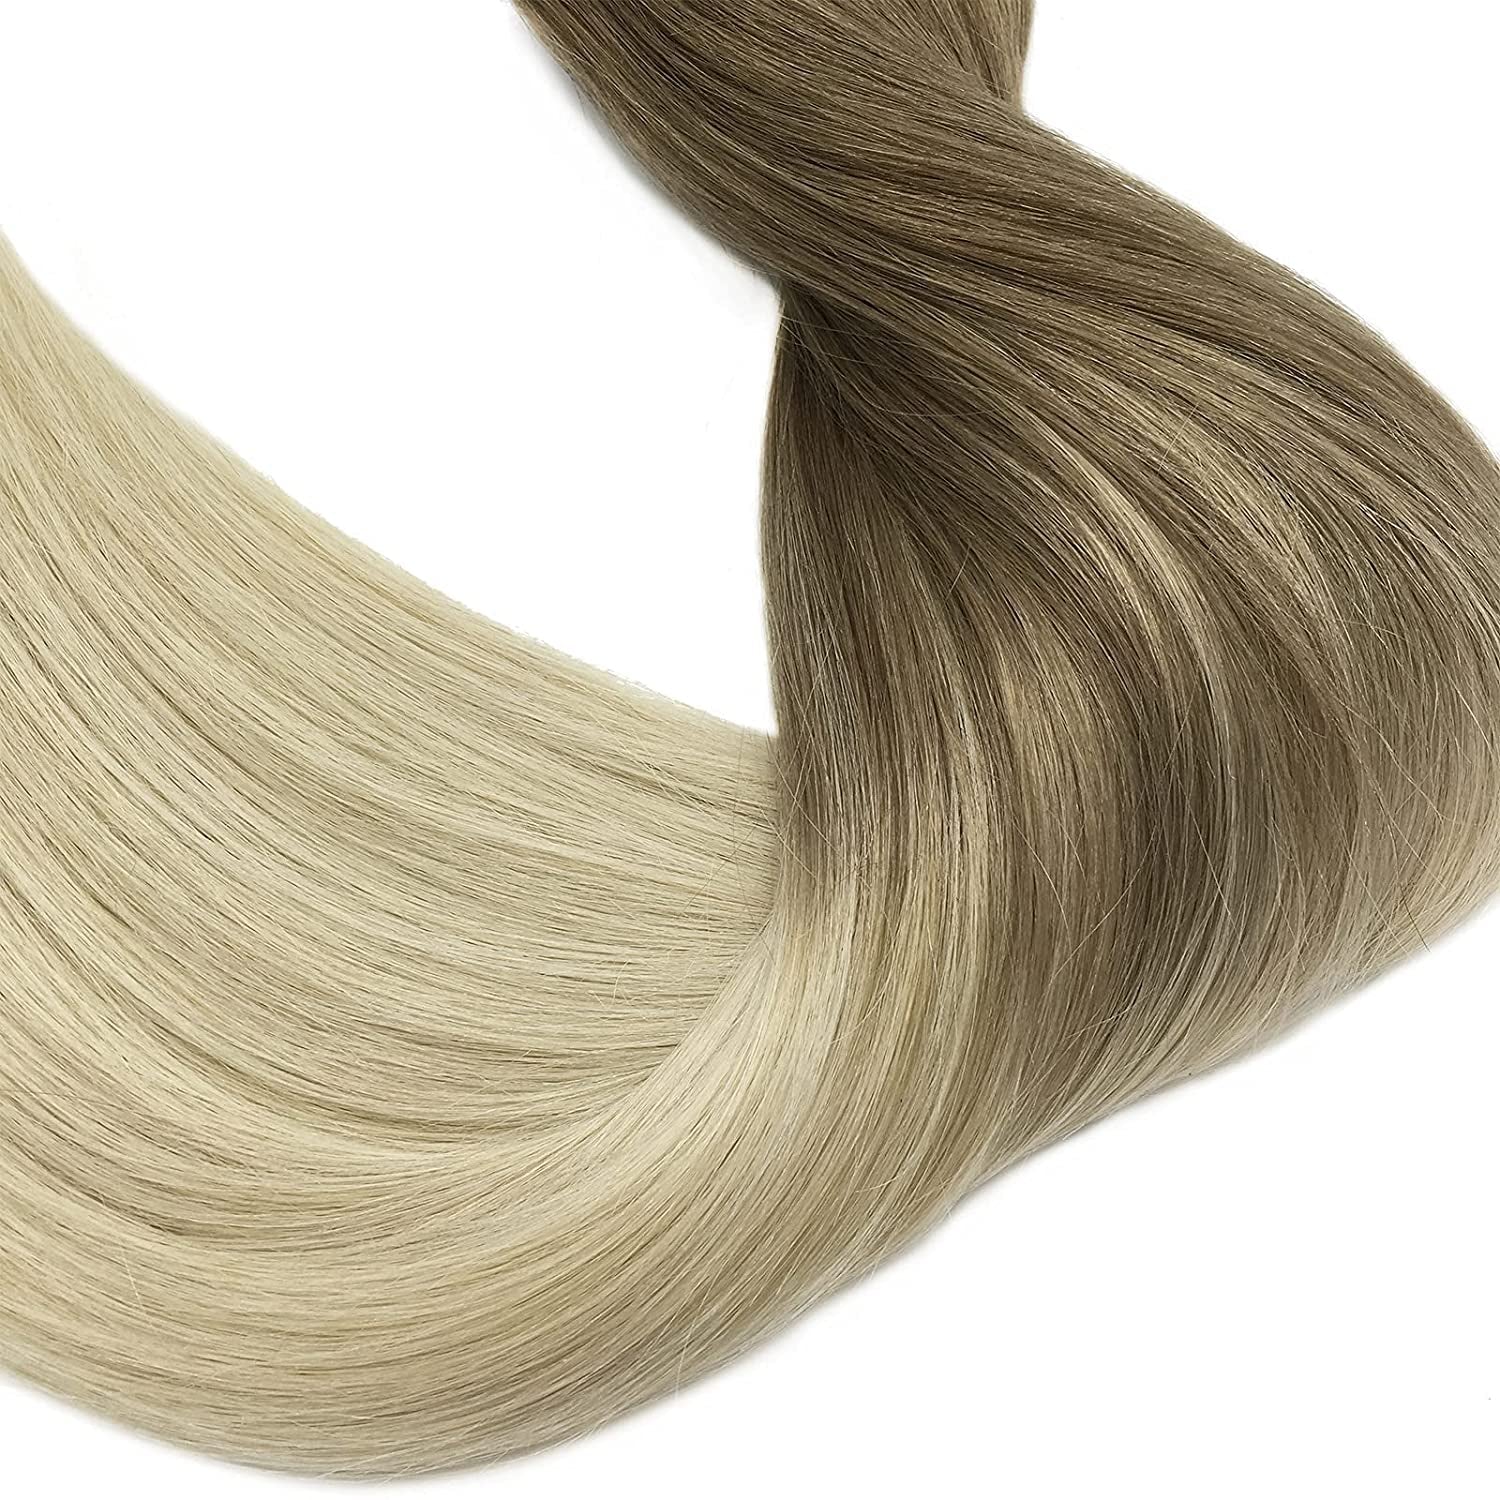 GOO GOO Clip-In Hair Extensions for Women, Soft & Natural, Handmade Real Human Hair Extensions, Ombre Ash Brown to Platinum Blonde, Long, Straight #T9/60, 7Pcs 120G 20 Inches